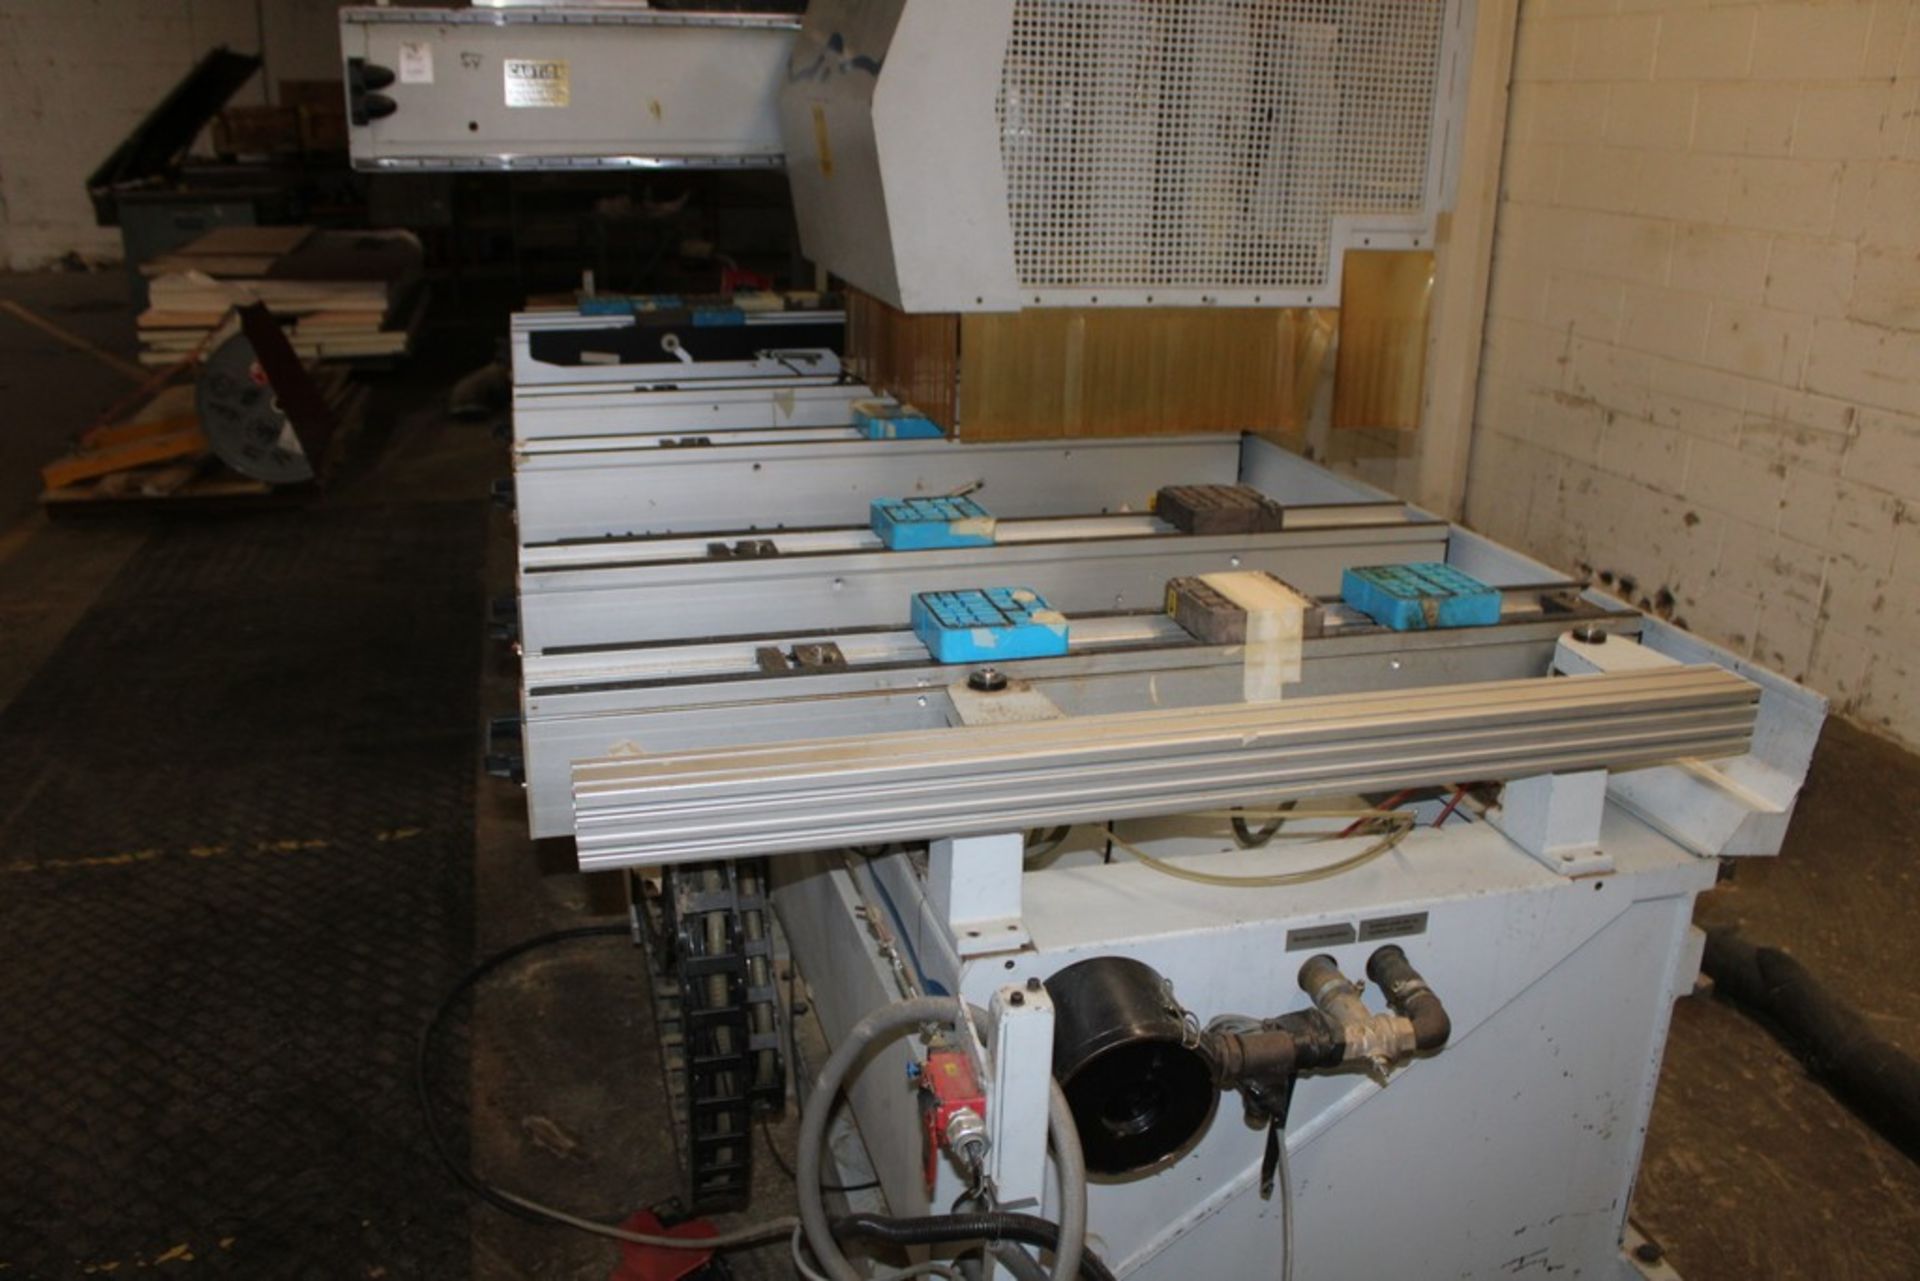 WEEKE MODEL PROFILINE BHC500 CNC ROUTER, S/N 0-250-13-0834 (NEW 2001), 120” MAX. PANEL LENGTH, 48” - Image 12 of 12